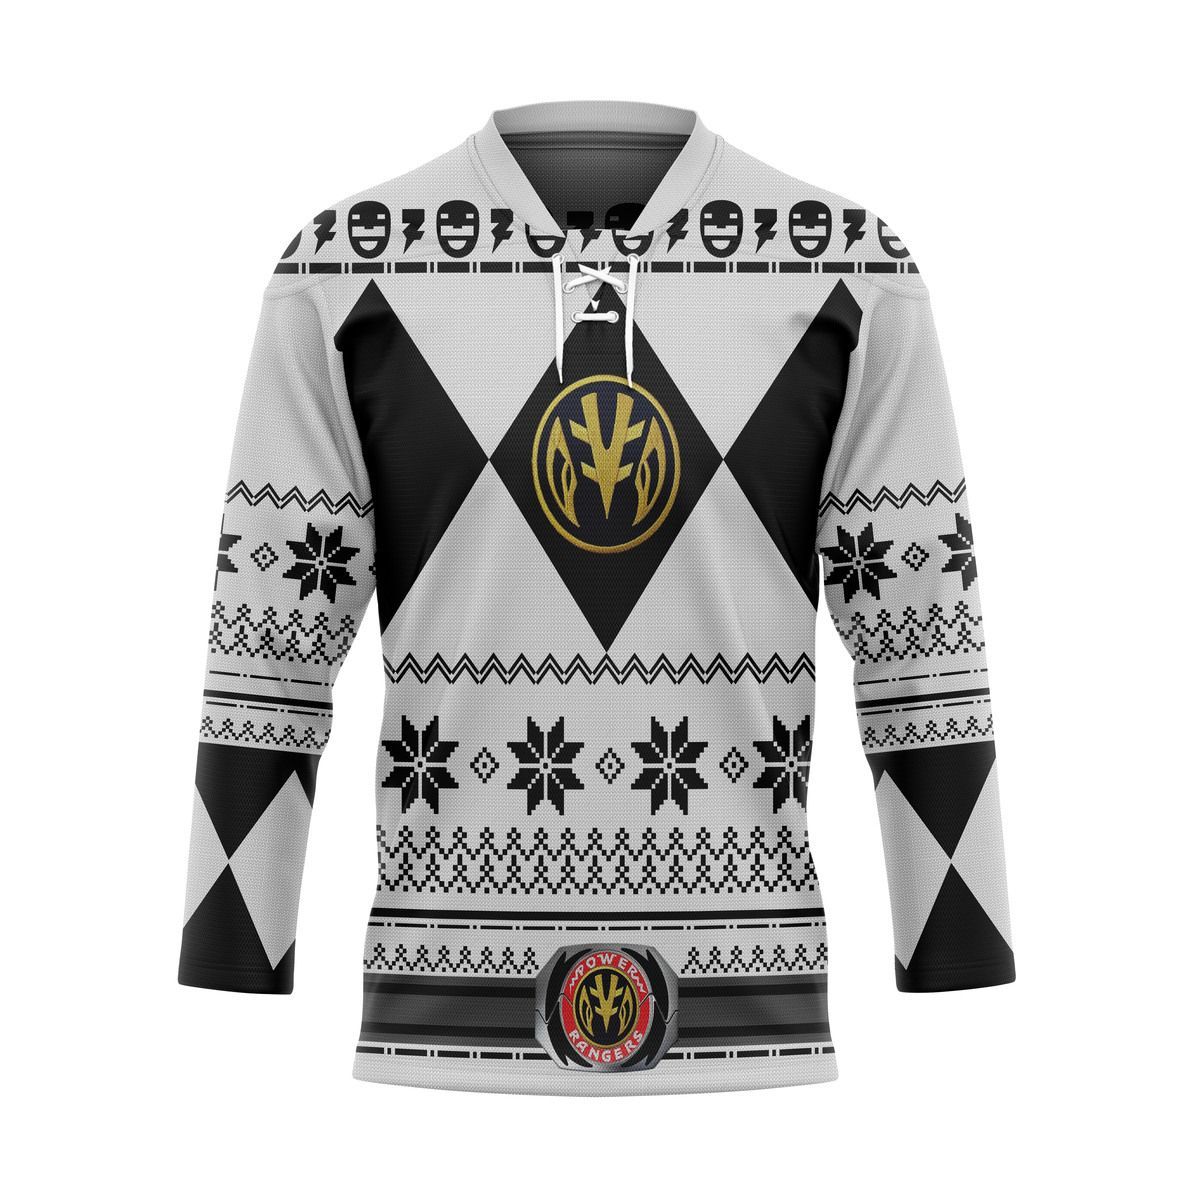 Top cool Hockey jersey for fan You can buy online. 54